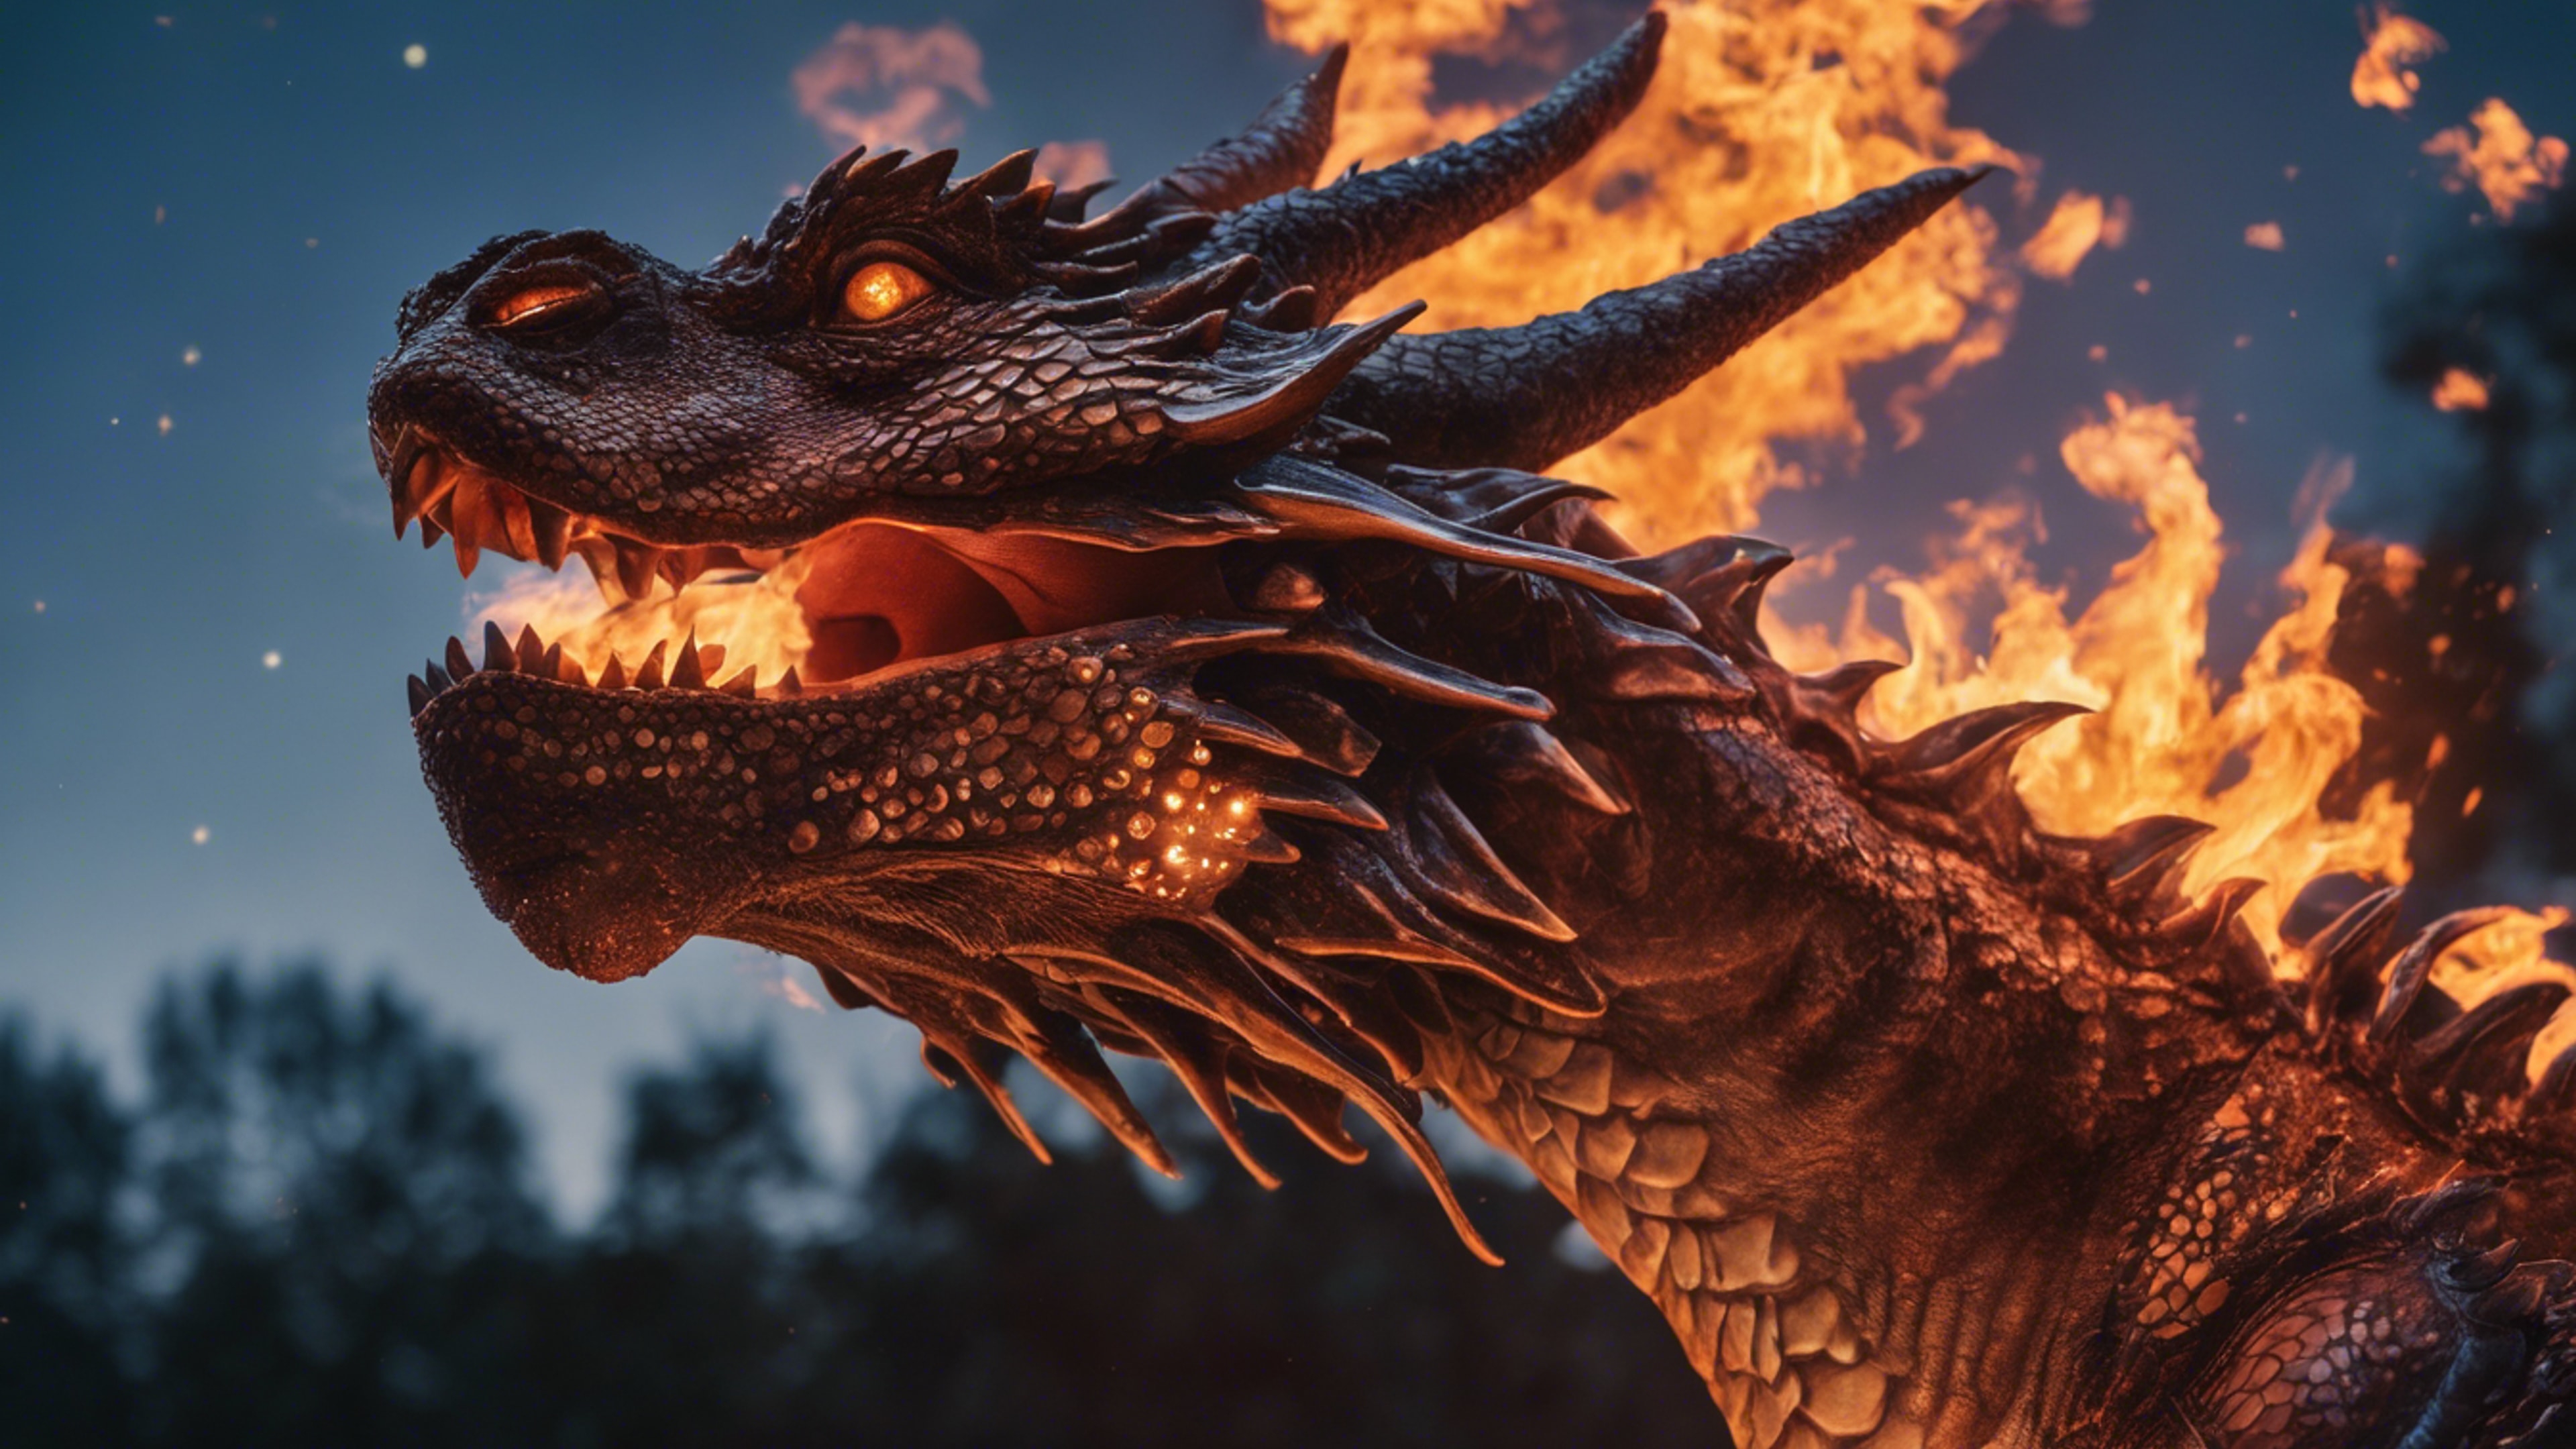 A fire-breathing dragon surrounded by the glow of its own flames against a night sky. Tapet[8f1bf836869843a19451]